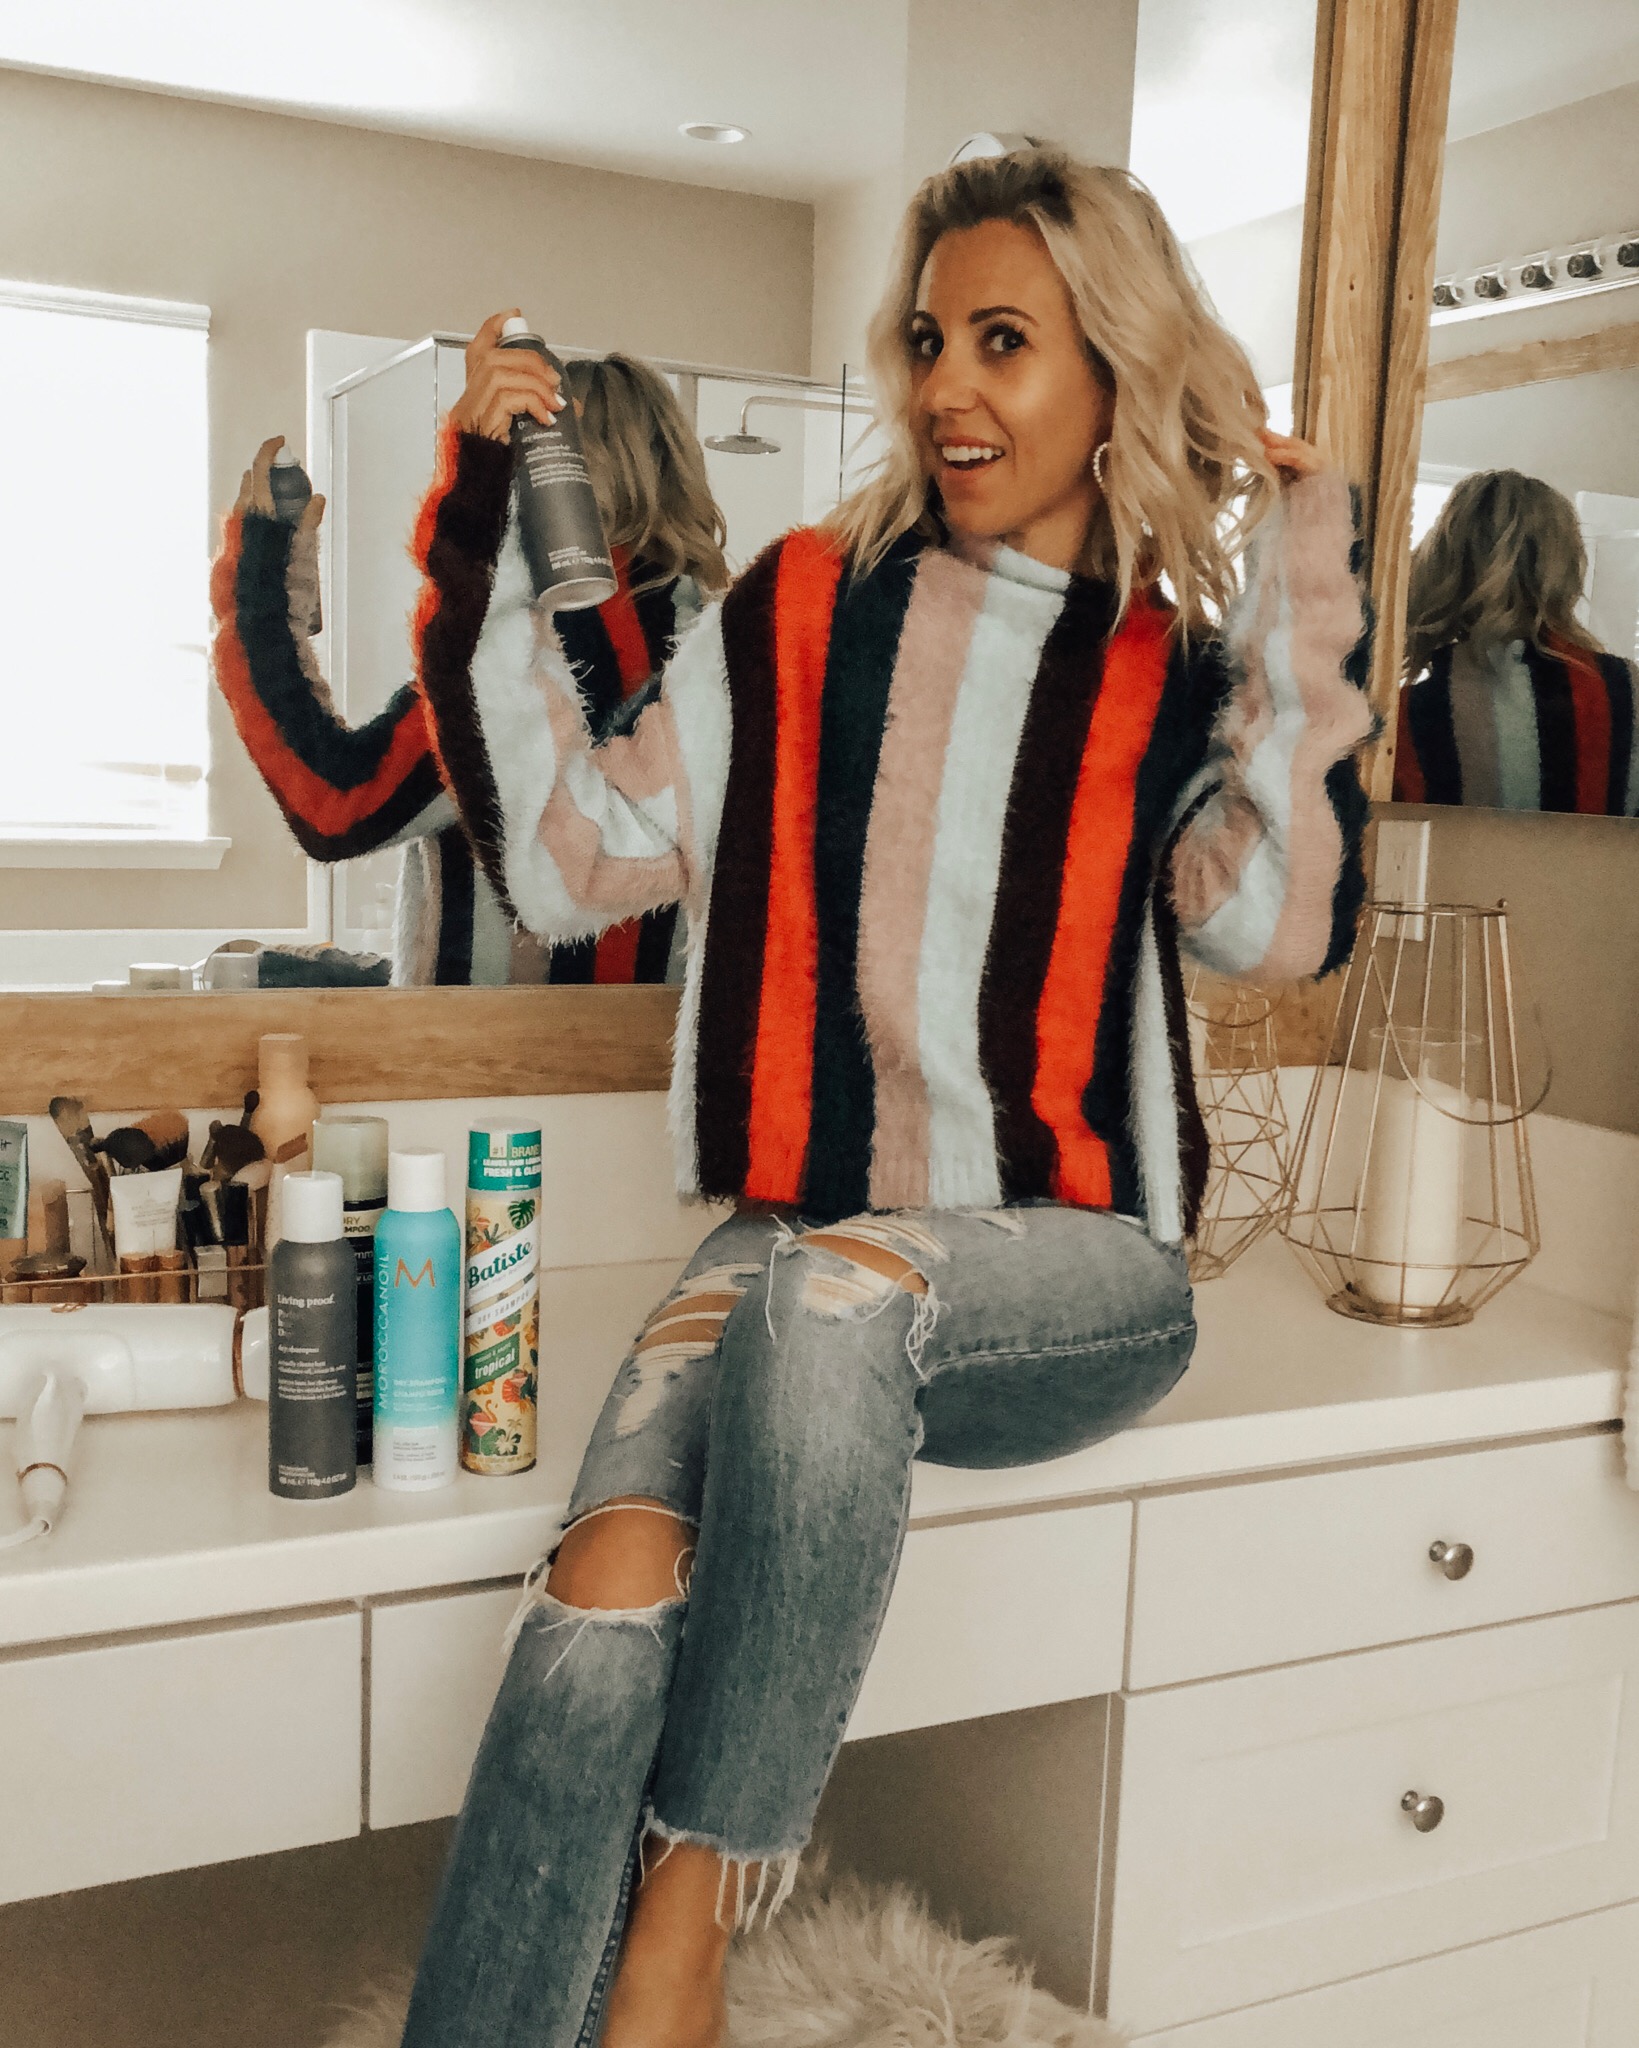 NATIONAL DRY SHAMPOO DAY- MY MUST HAVES - Jaclyn De Leon Style = Looking for the best dry shampoo on the market? I've tried and tested tons of popular brands and I'm dishing all about my must have top 4 dry shampoos. Two are worth the splurge and the other two are under $8 and you can find at Target or your local drug store.